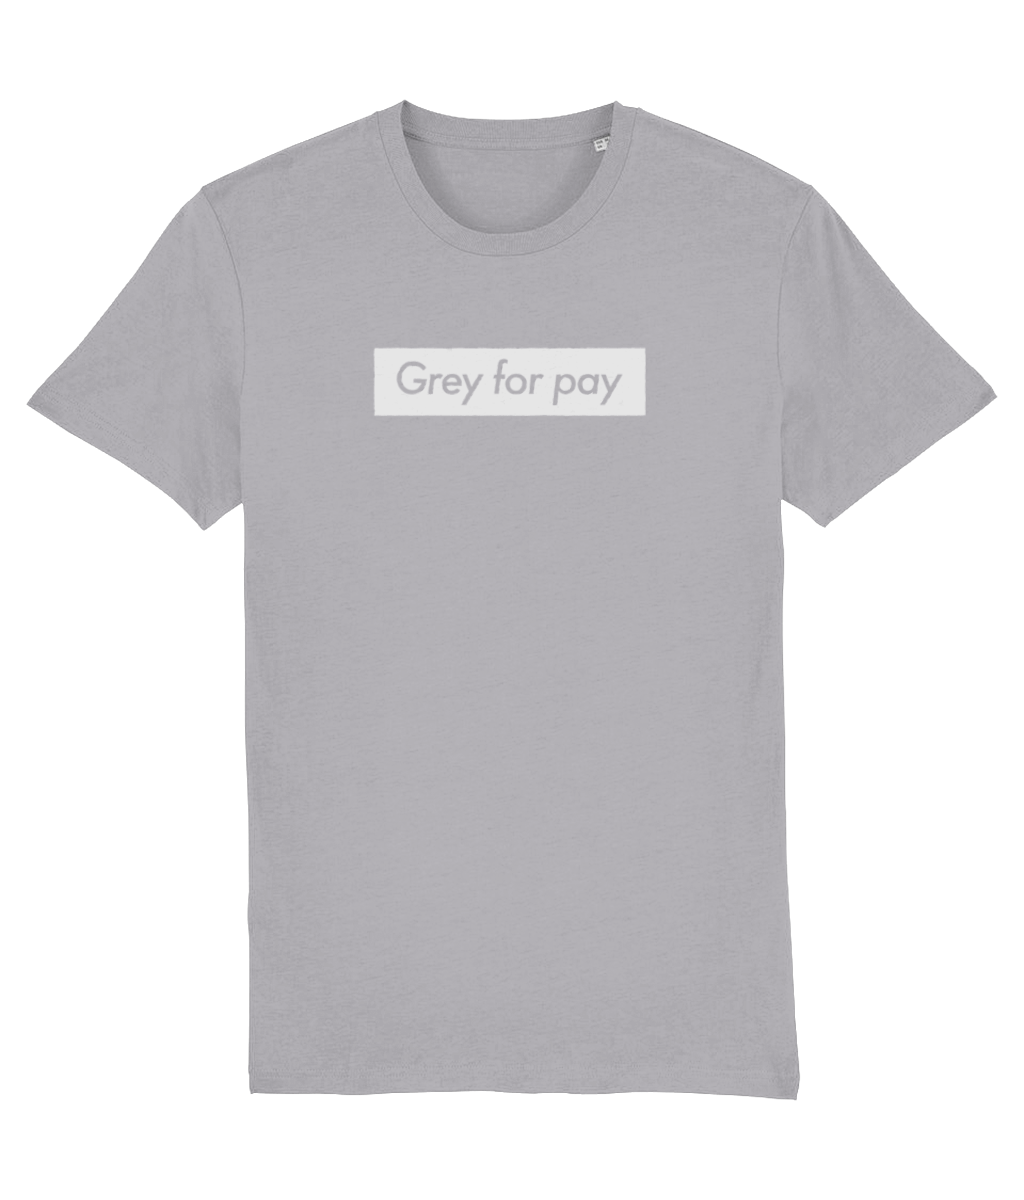 Grey for pay Organic Cotton T-Shirt